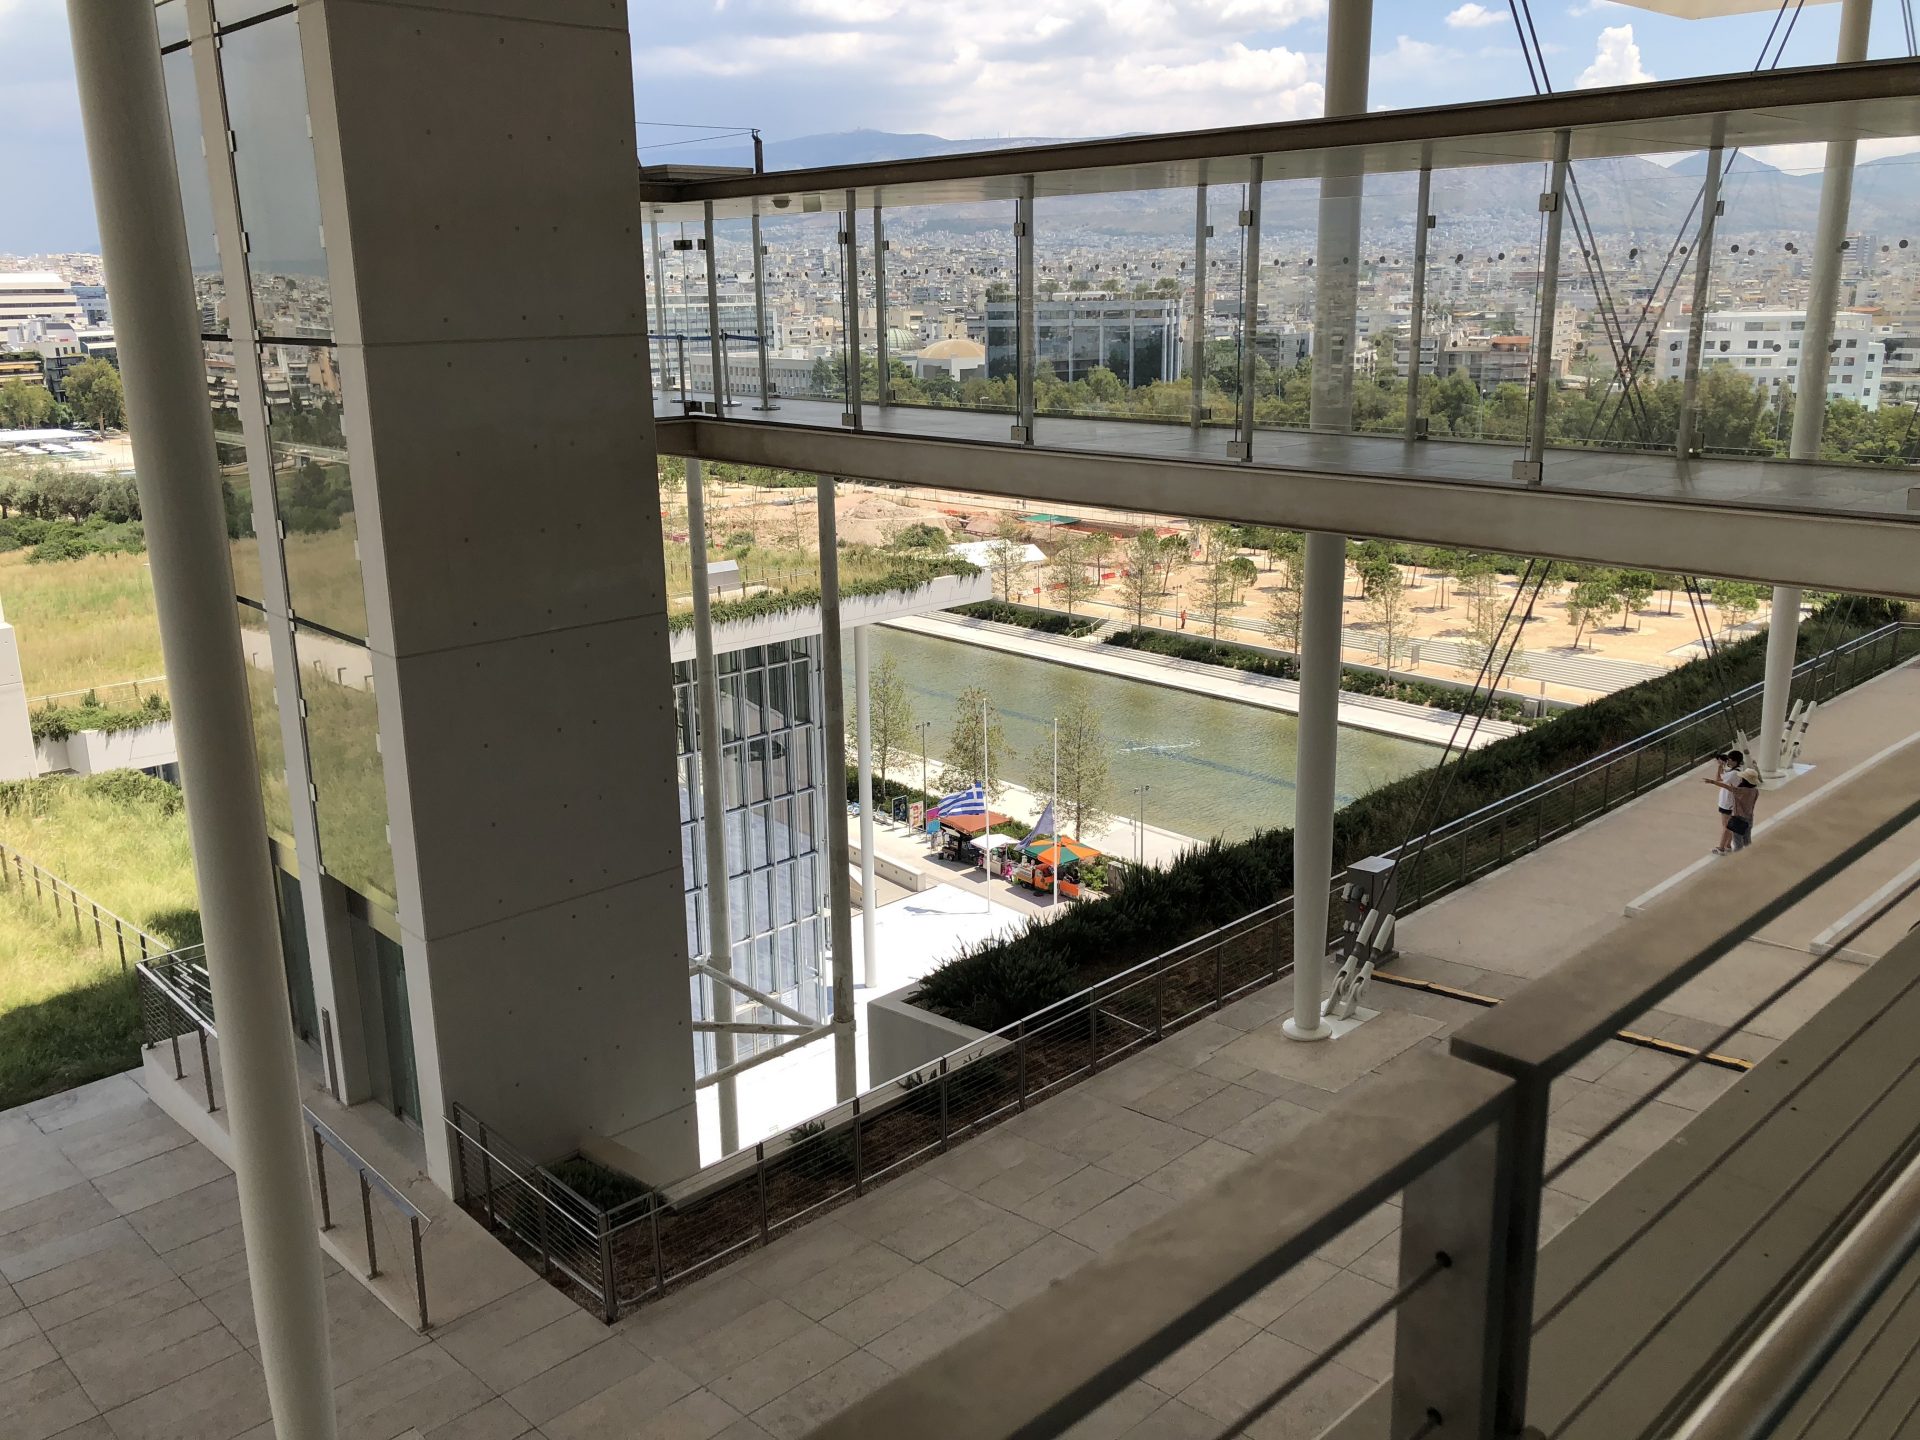 The Stavros Niarchos Foundation in Athens